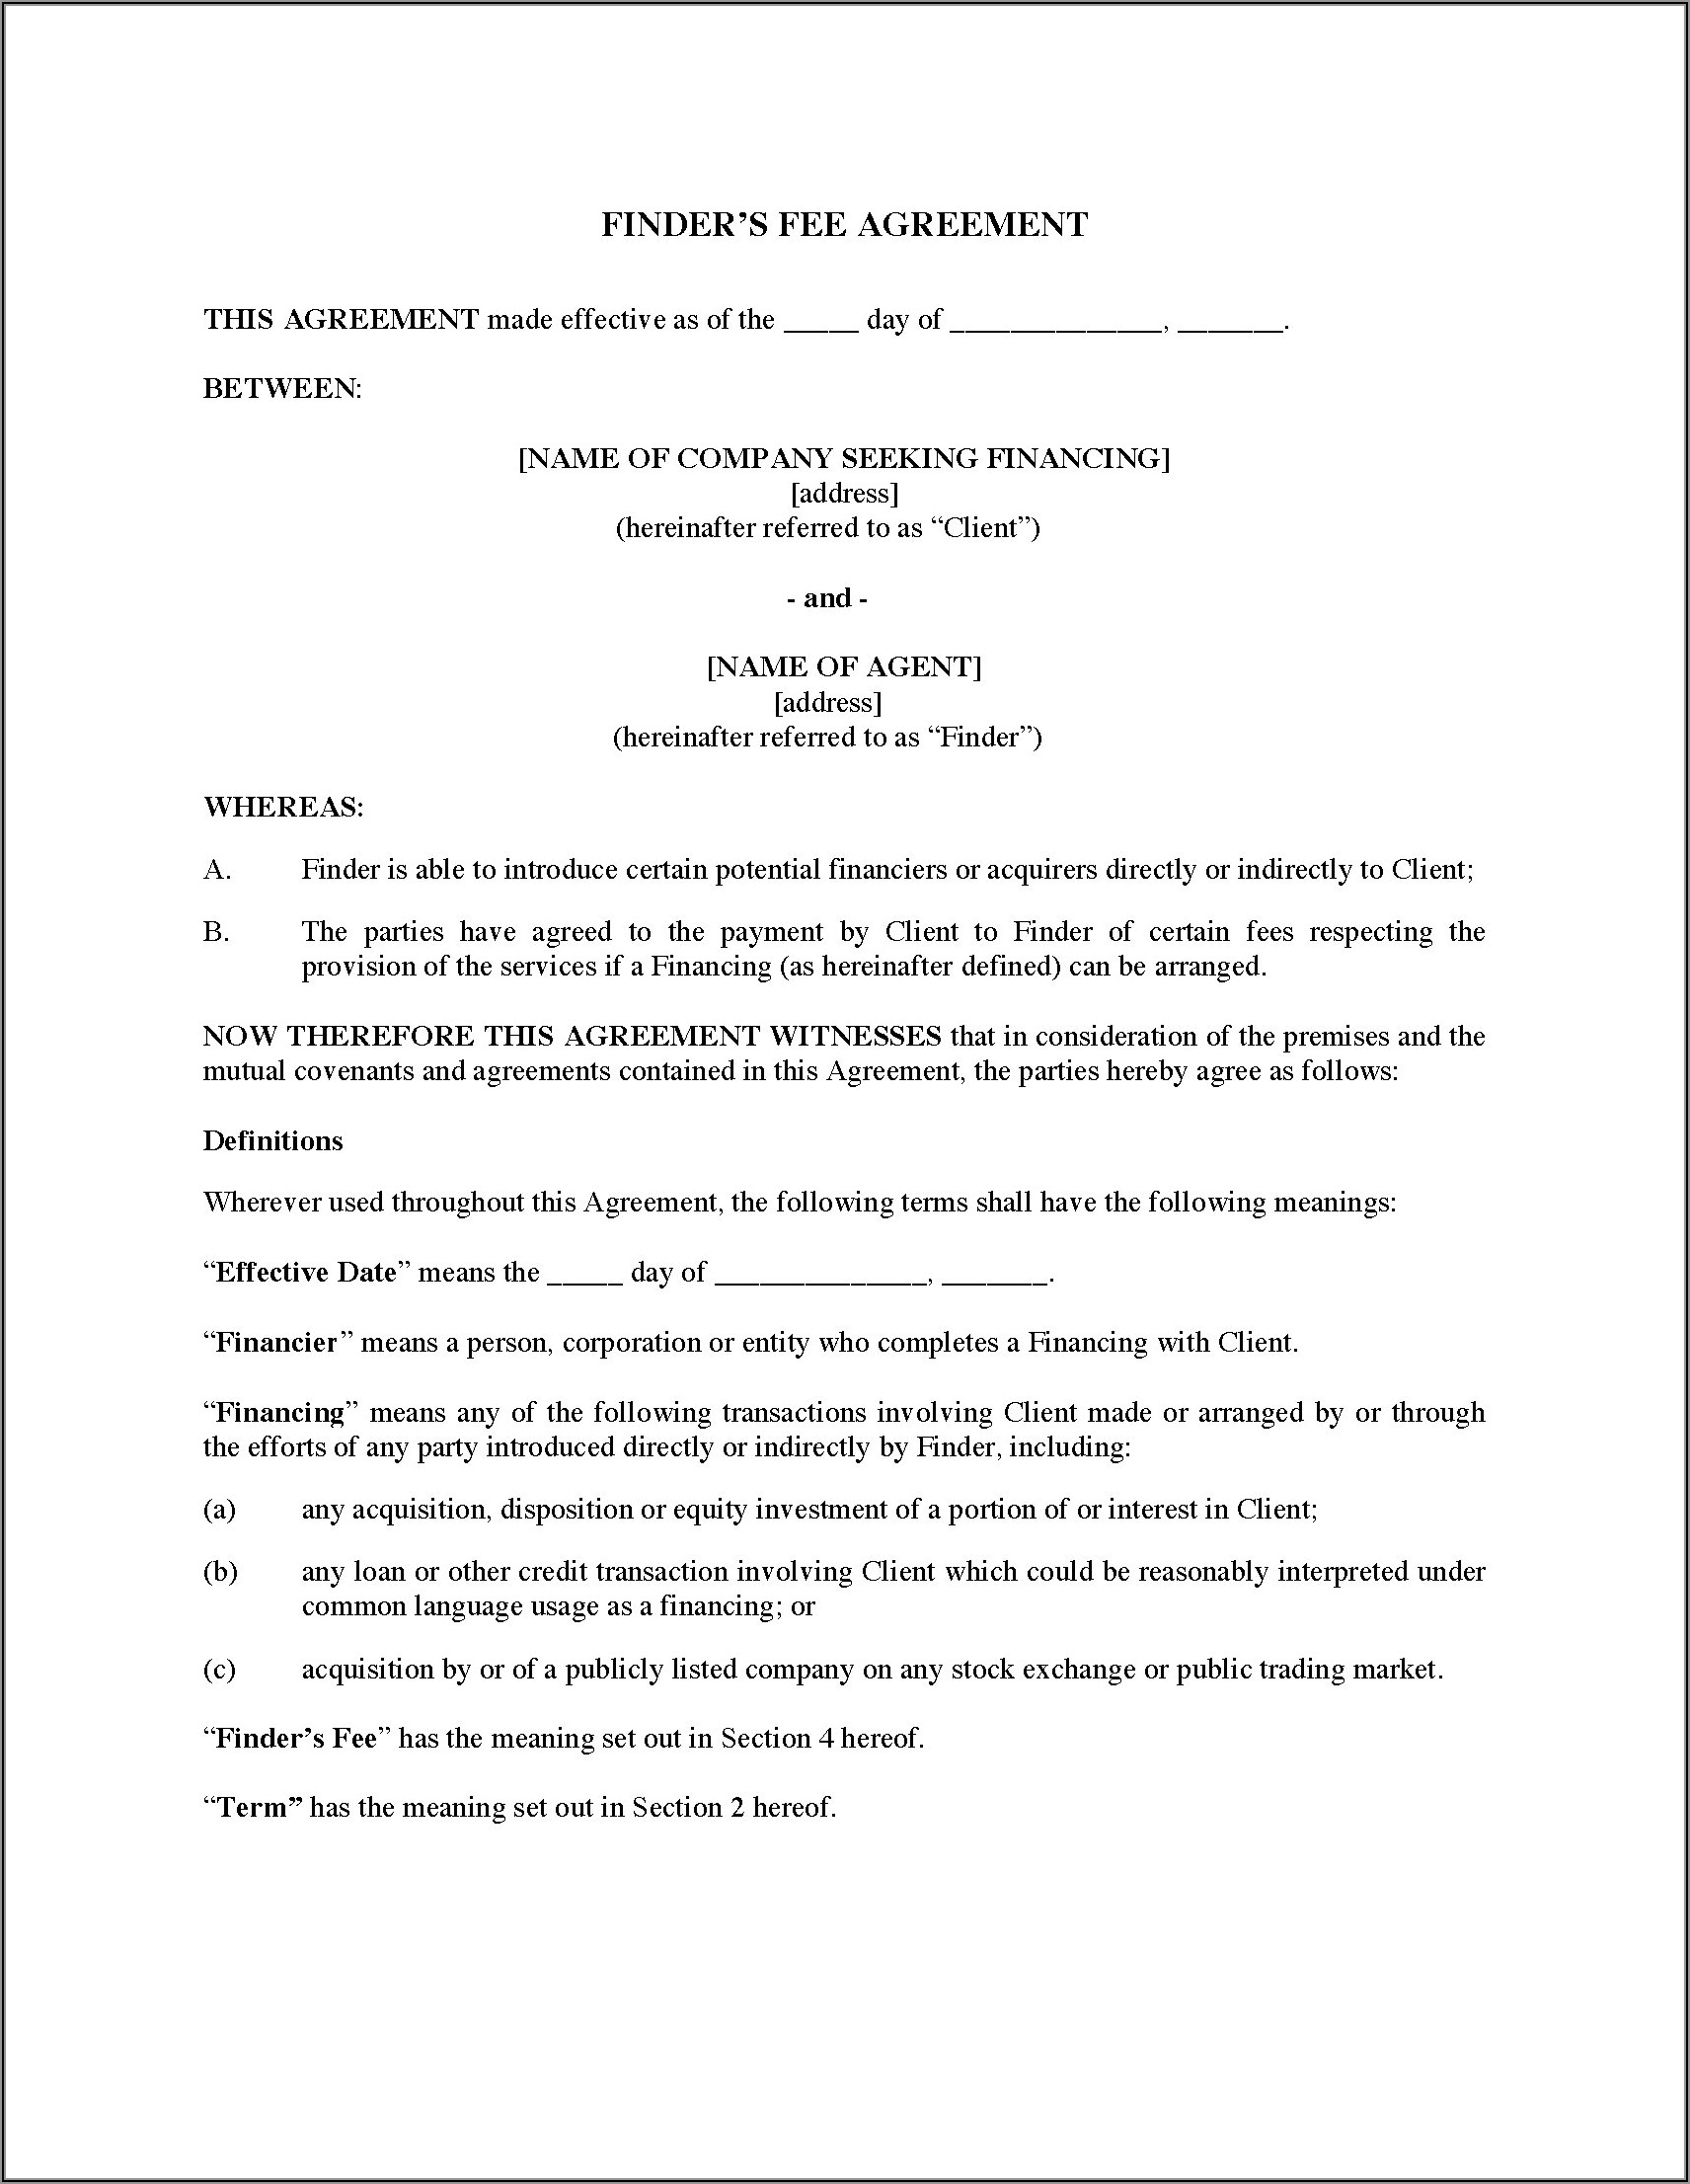 Venture Capital Finder's Fee Agreement Template